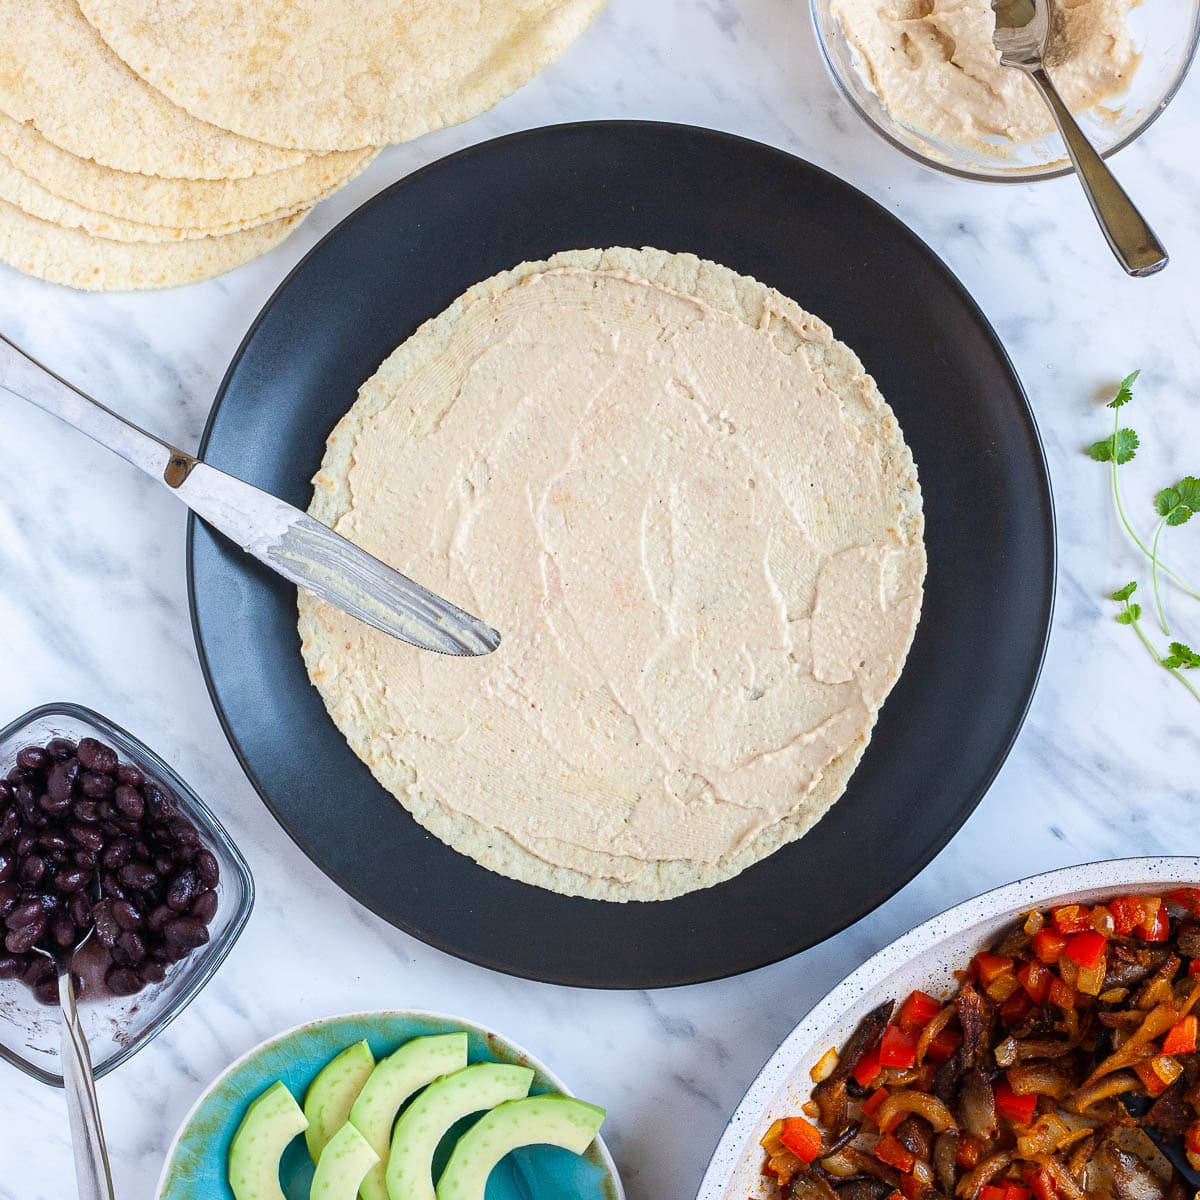 A tortilla covered with light brown hummus on a black plate. The fillings are around it like cooked veggies, avocado slices, black beans, more tortilla and more hummus.